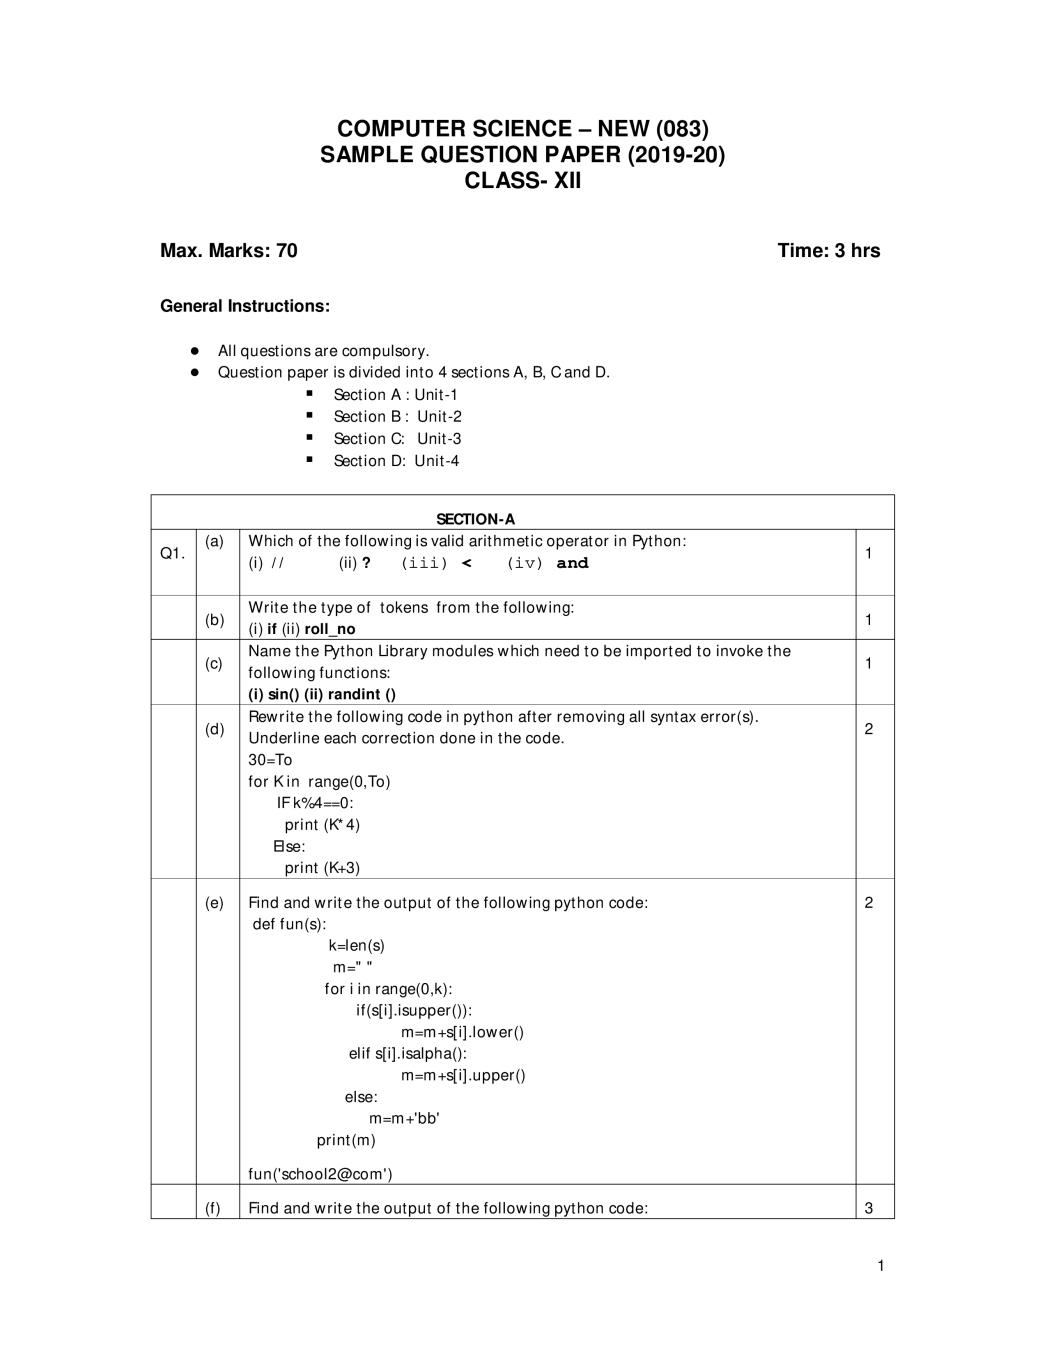 CBSE Class 12 Sample Paper 2020 for Computer Science New - Page 1